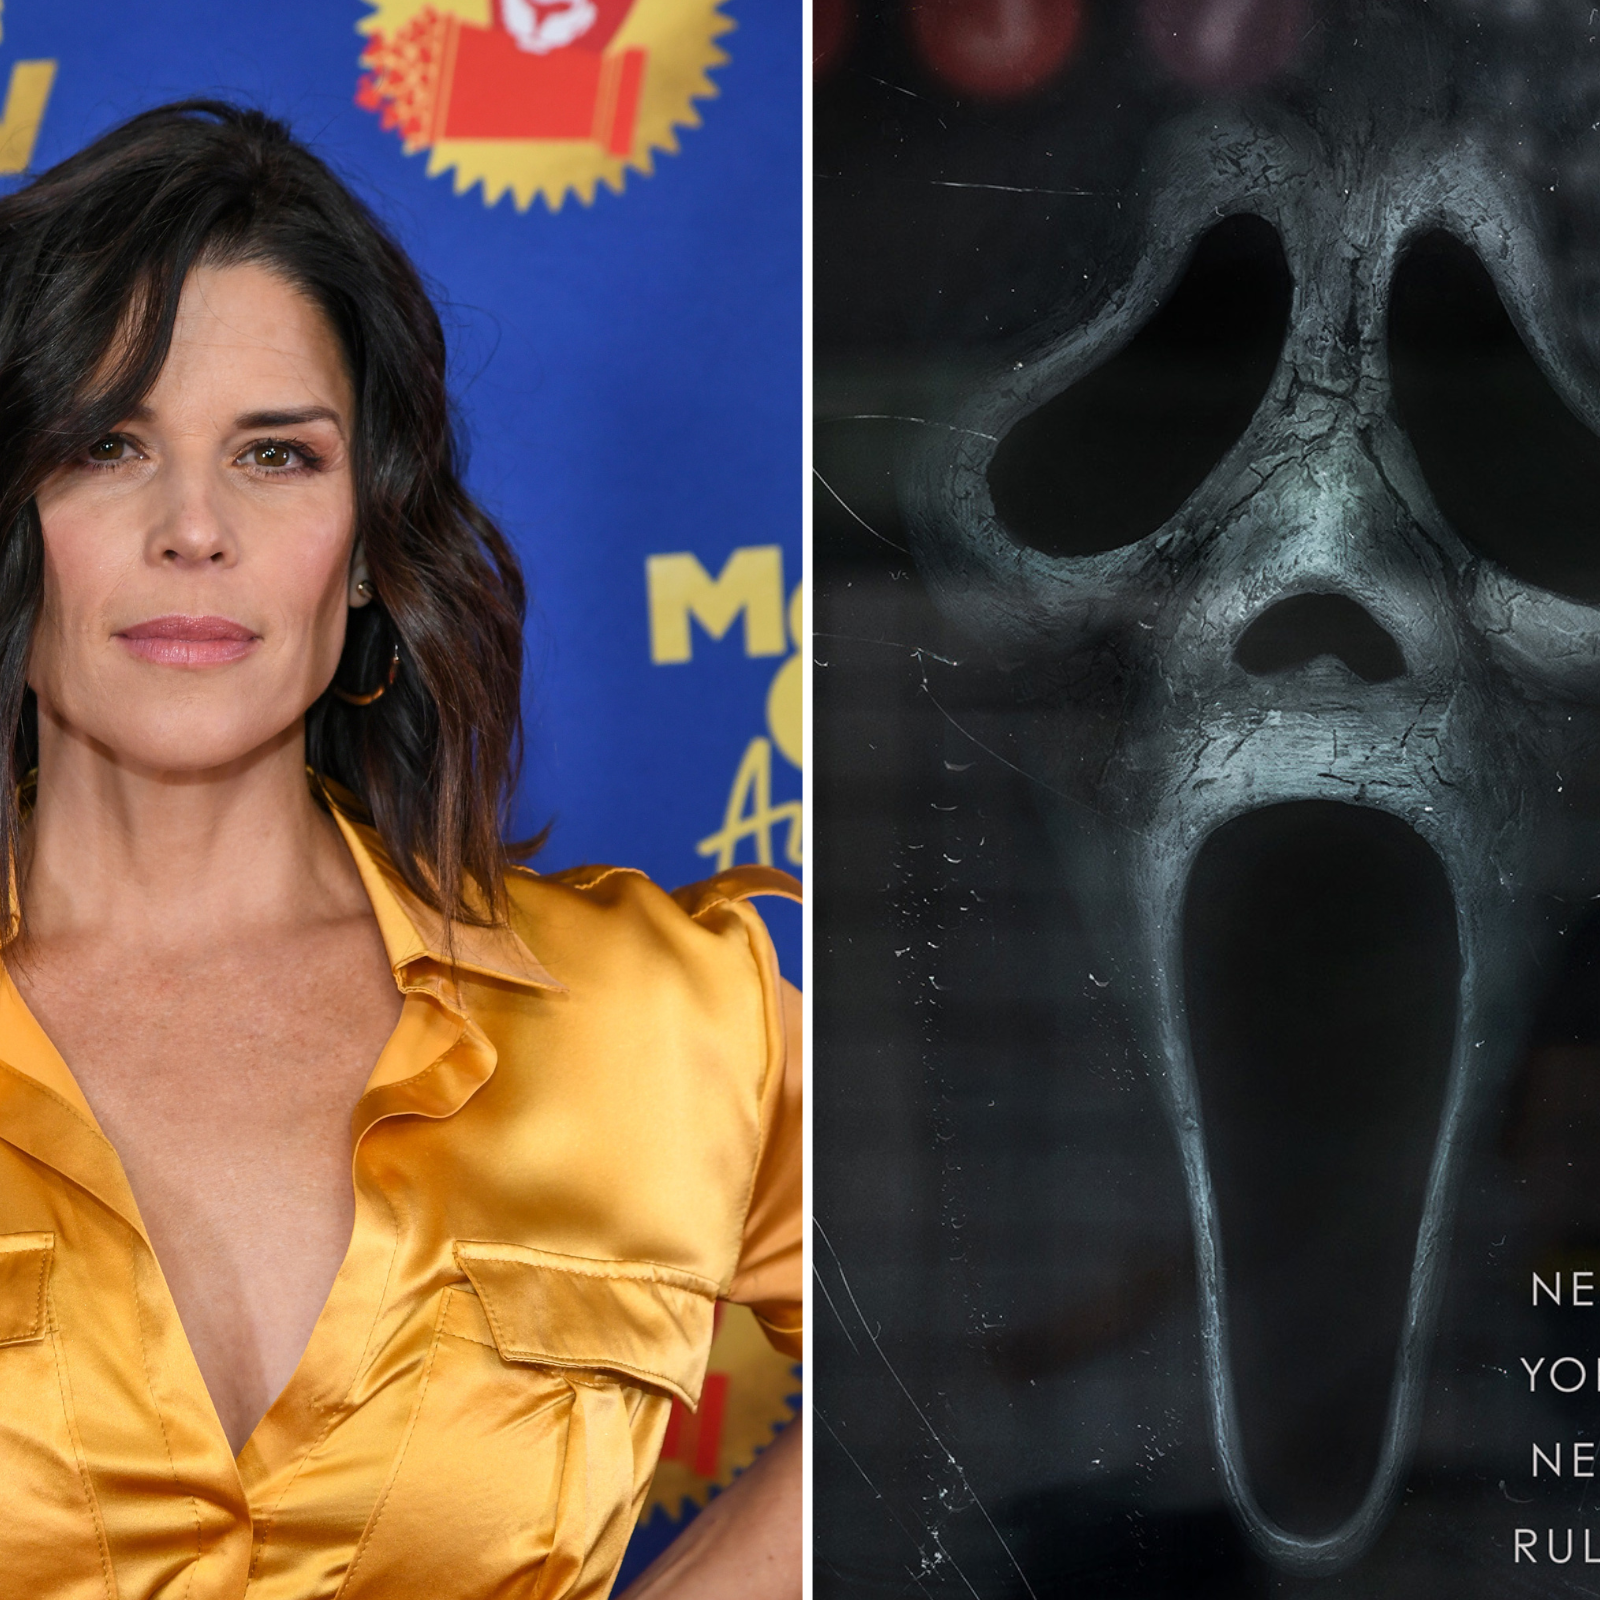 Why is Neve Campbell Not in 'Scream 6'? Star's Absence Explained